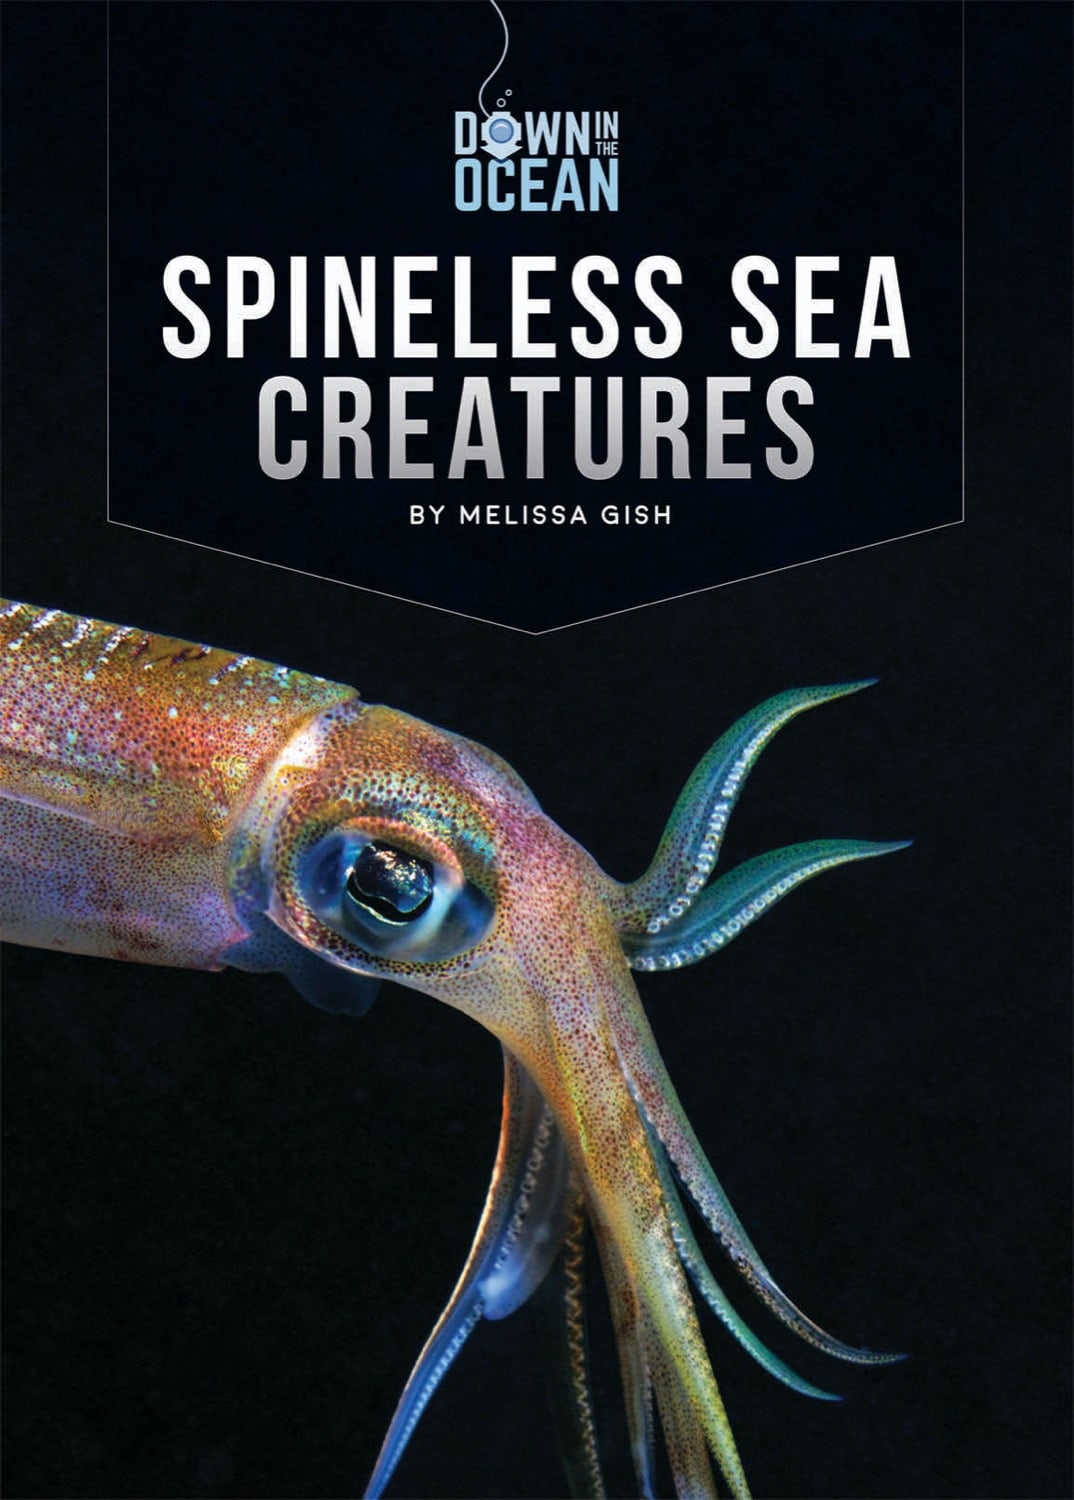 Down in the Ocean: Spineless Sea Creatures